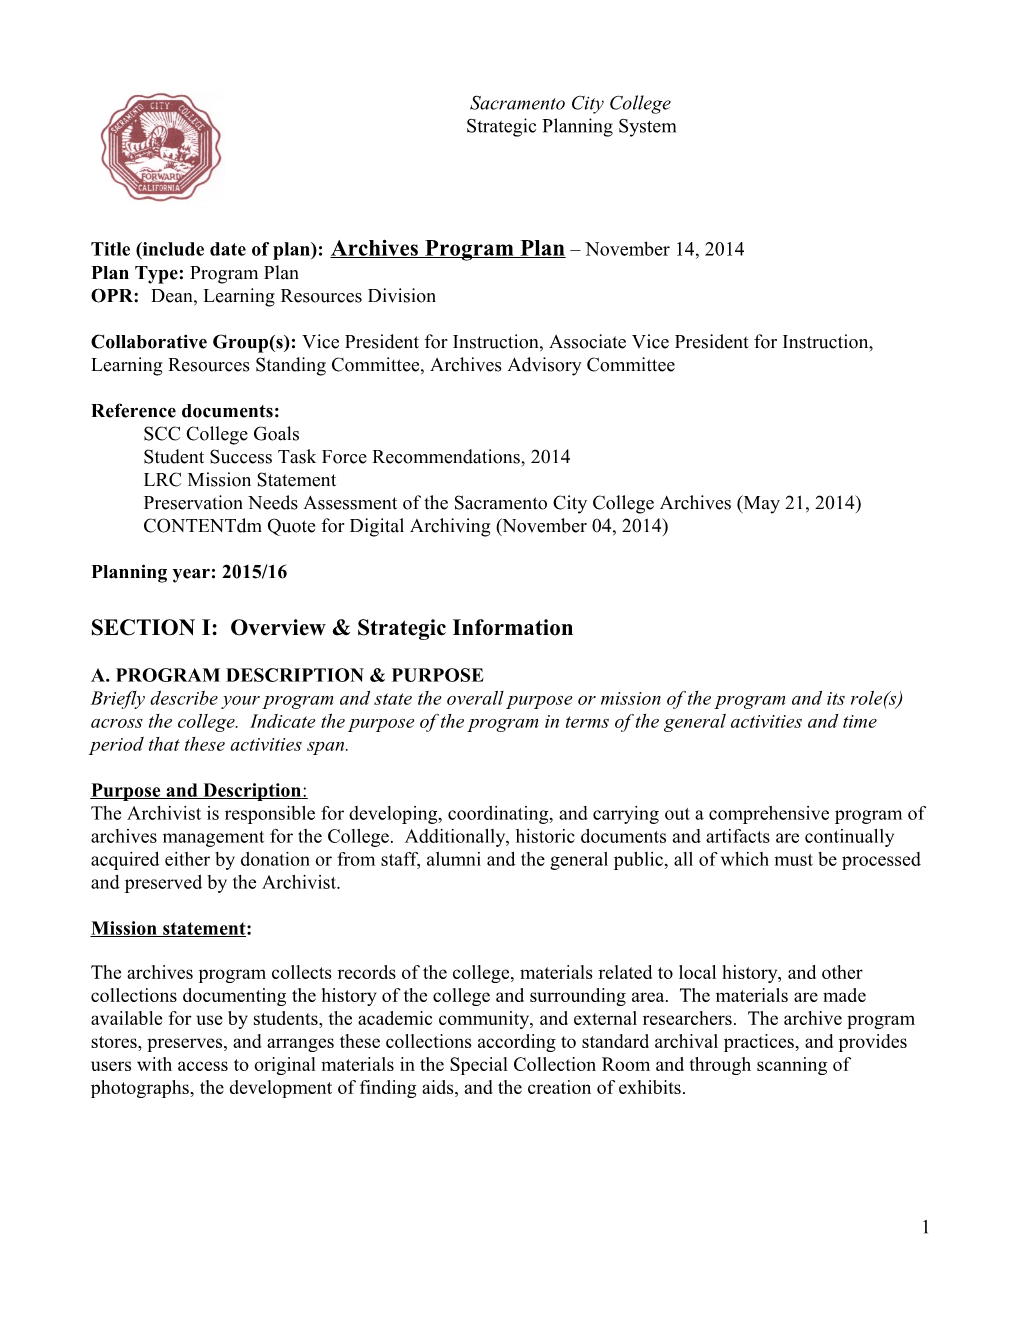 Title (Include Date of Plan):Archives Program Plan November 14, 2014